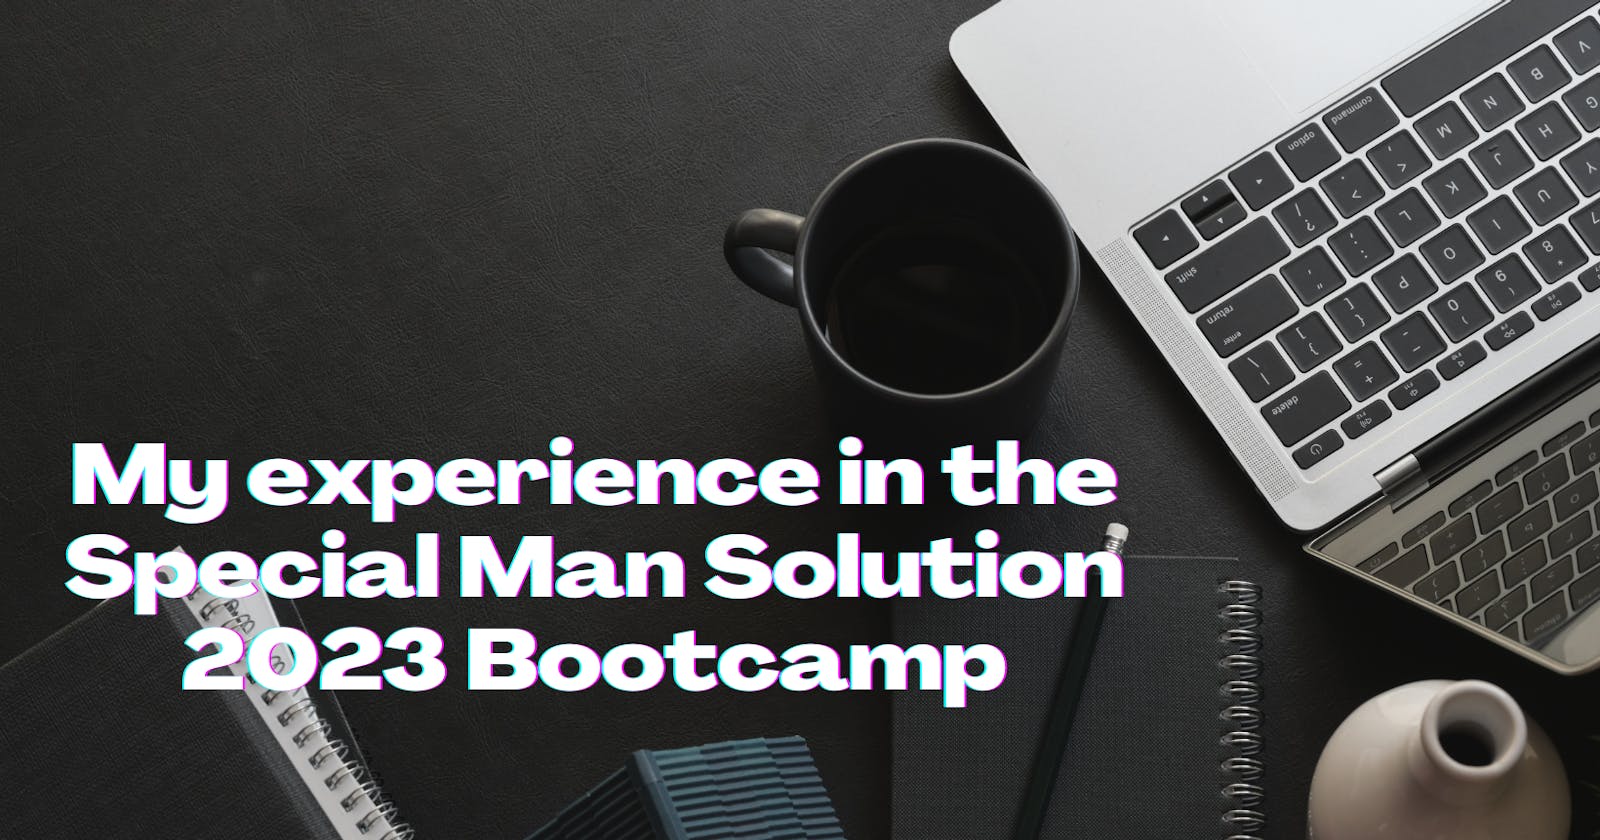 Special Man Solution 2023 Bootcamp Experience